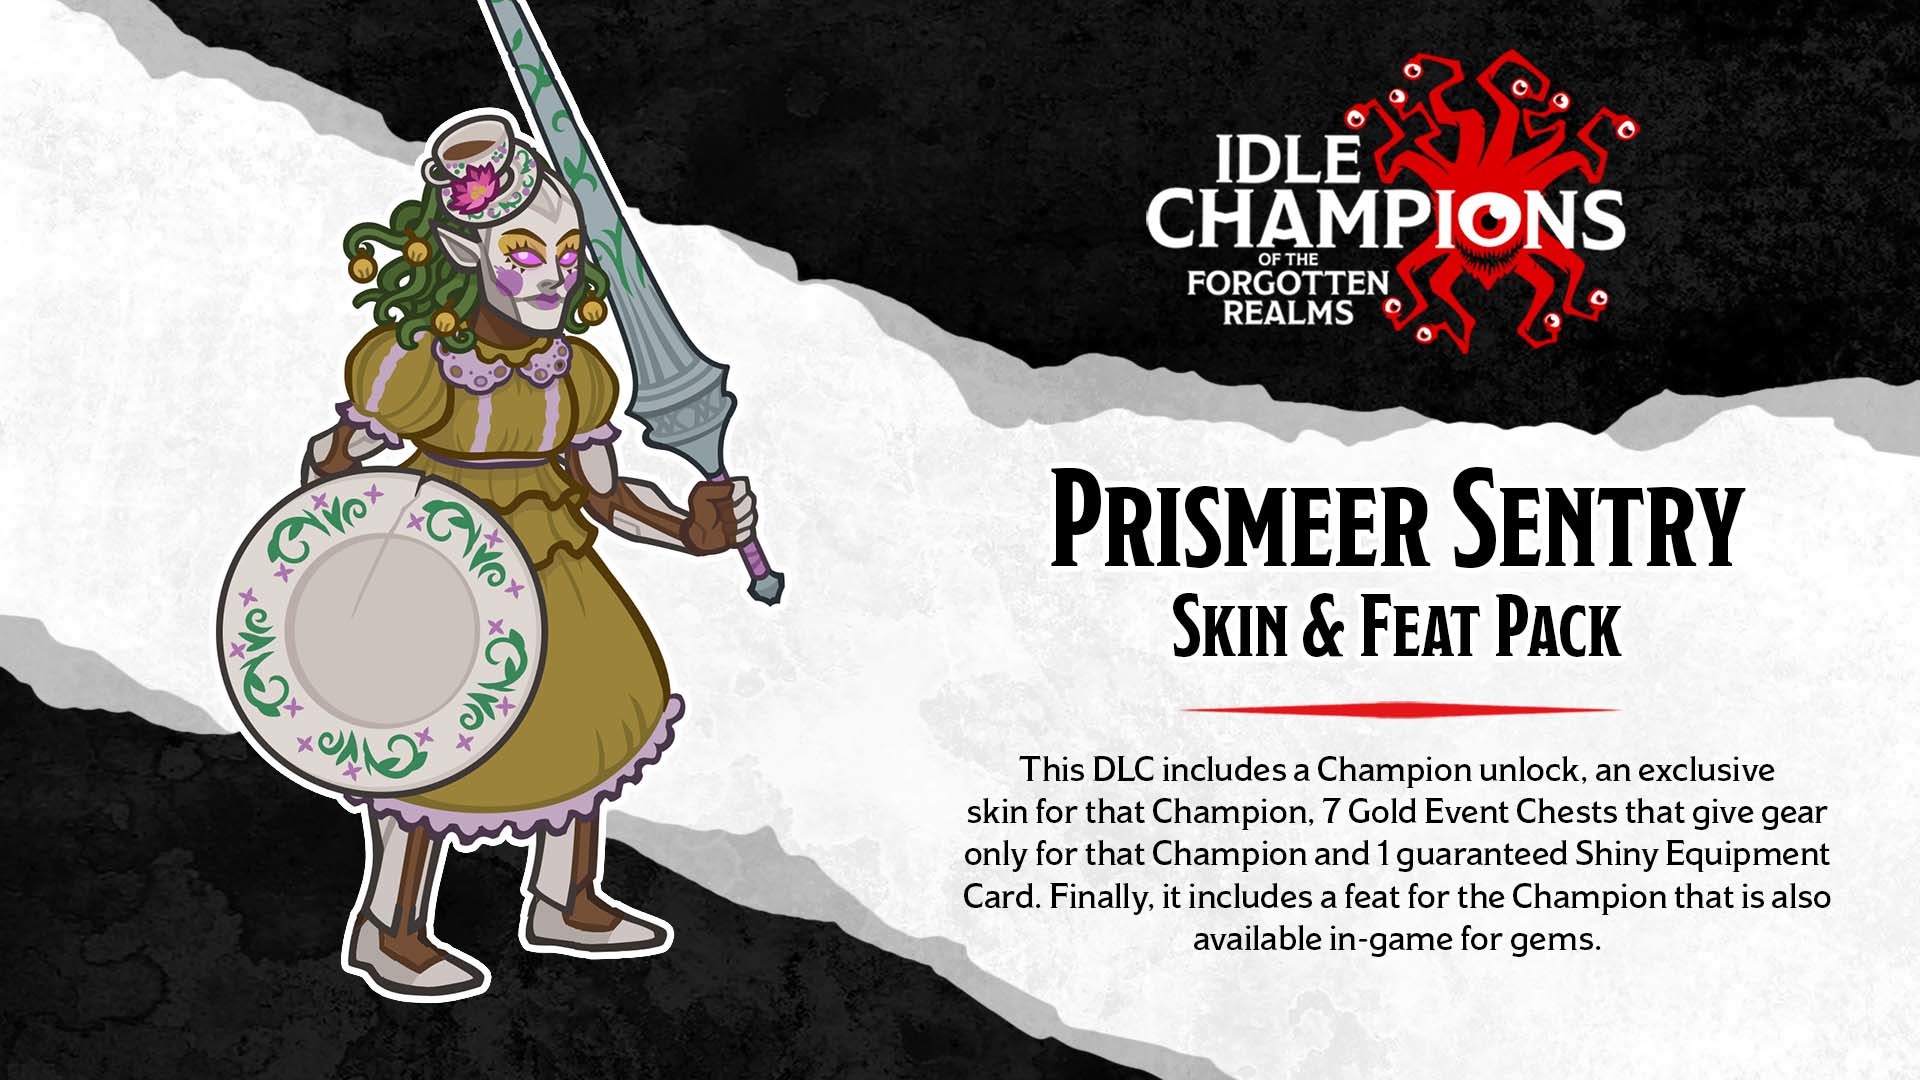 Idle Champions - Prismeer Sentry Skin & Feat Pack DLC Steam CD Key 1.05 usd